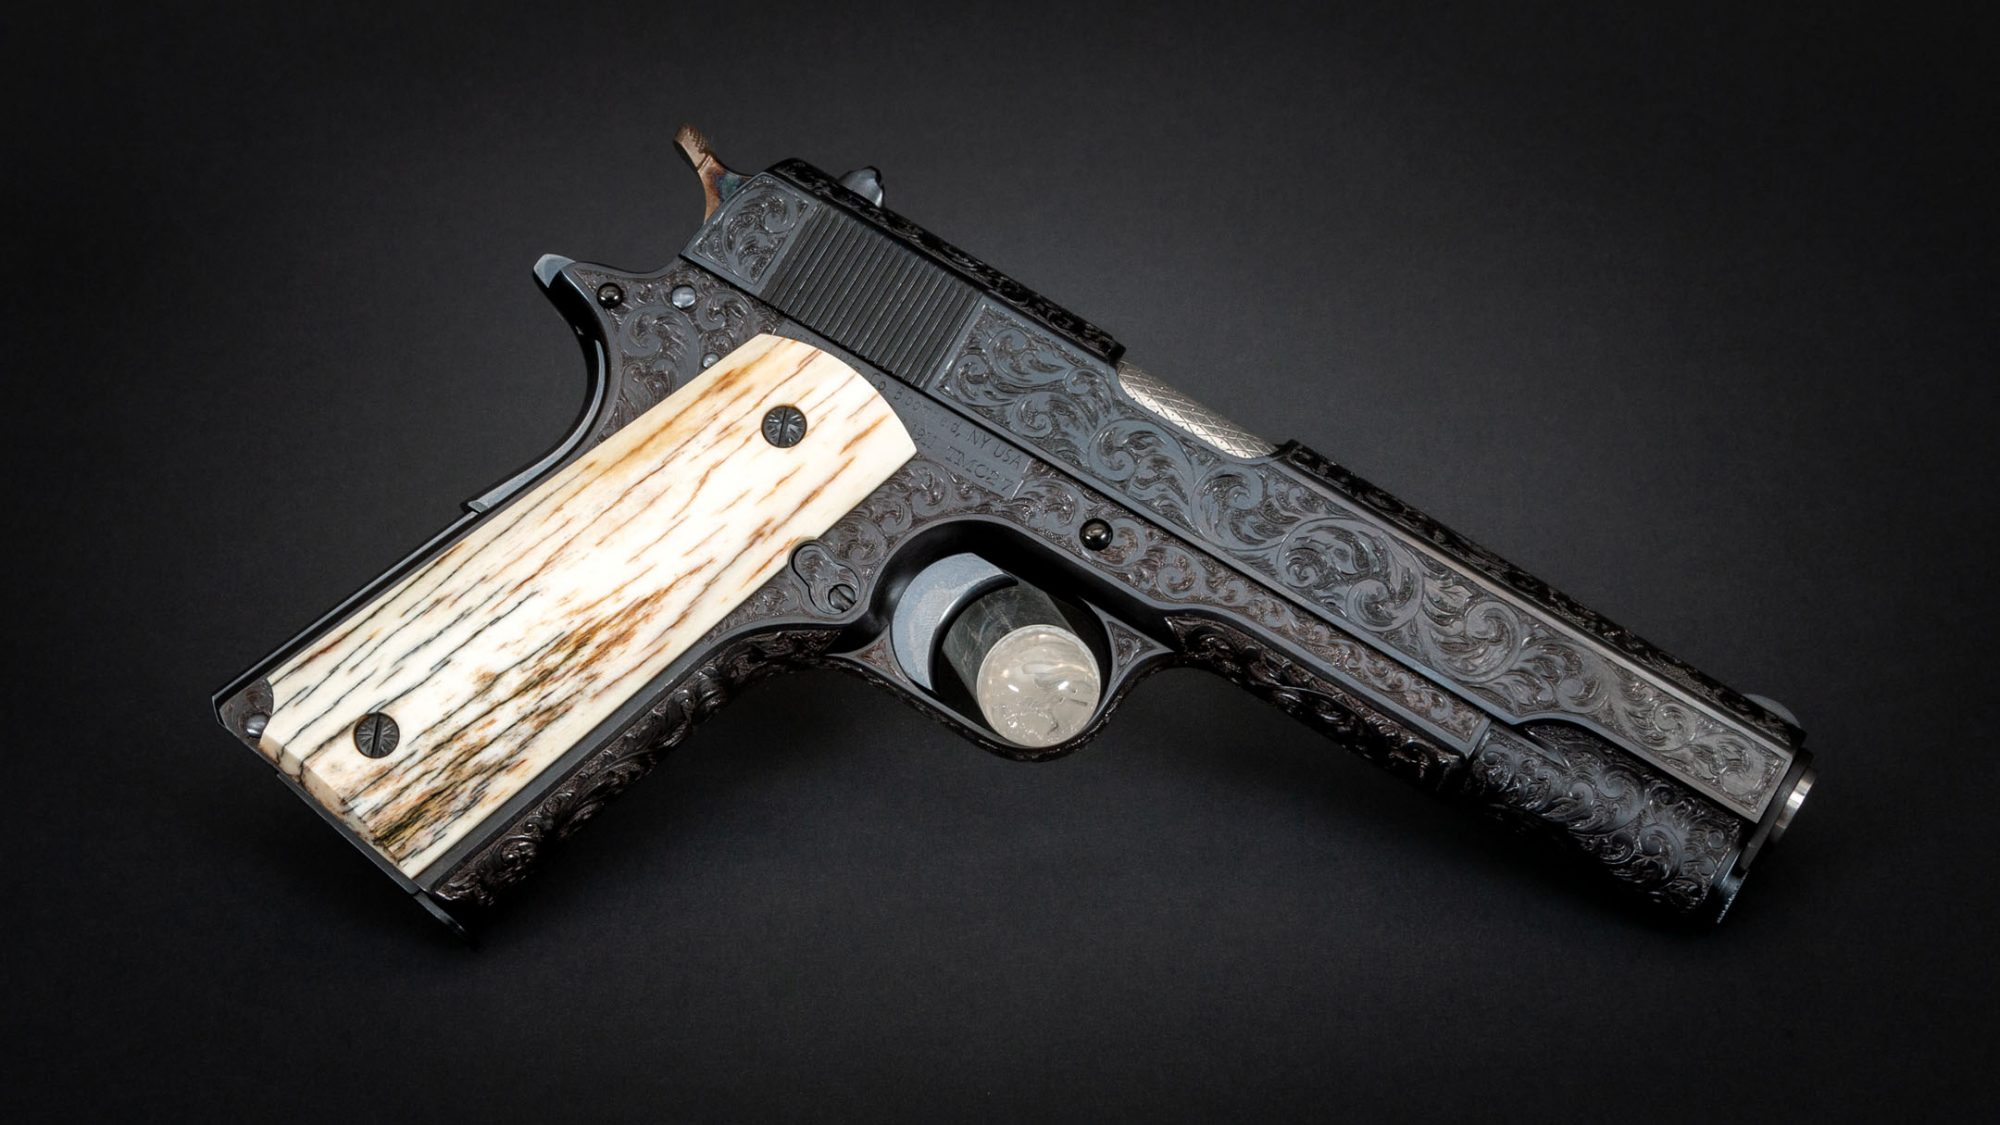 Photo of a Turnbull Model 1911 pistol engraved by Ralph W. Ingle, for sale by Turnbull Restoration of Bloomfield, NY